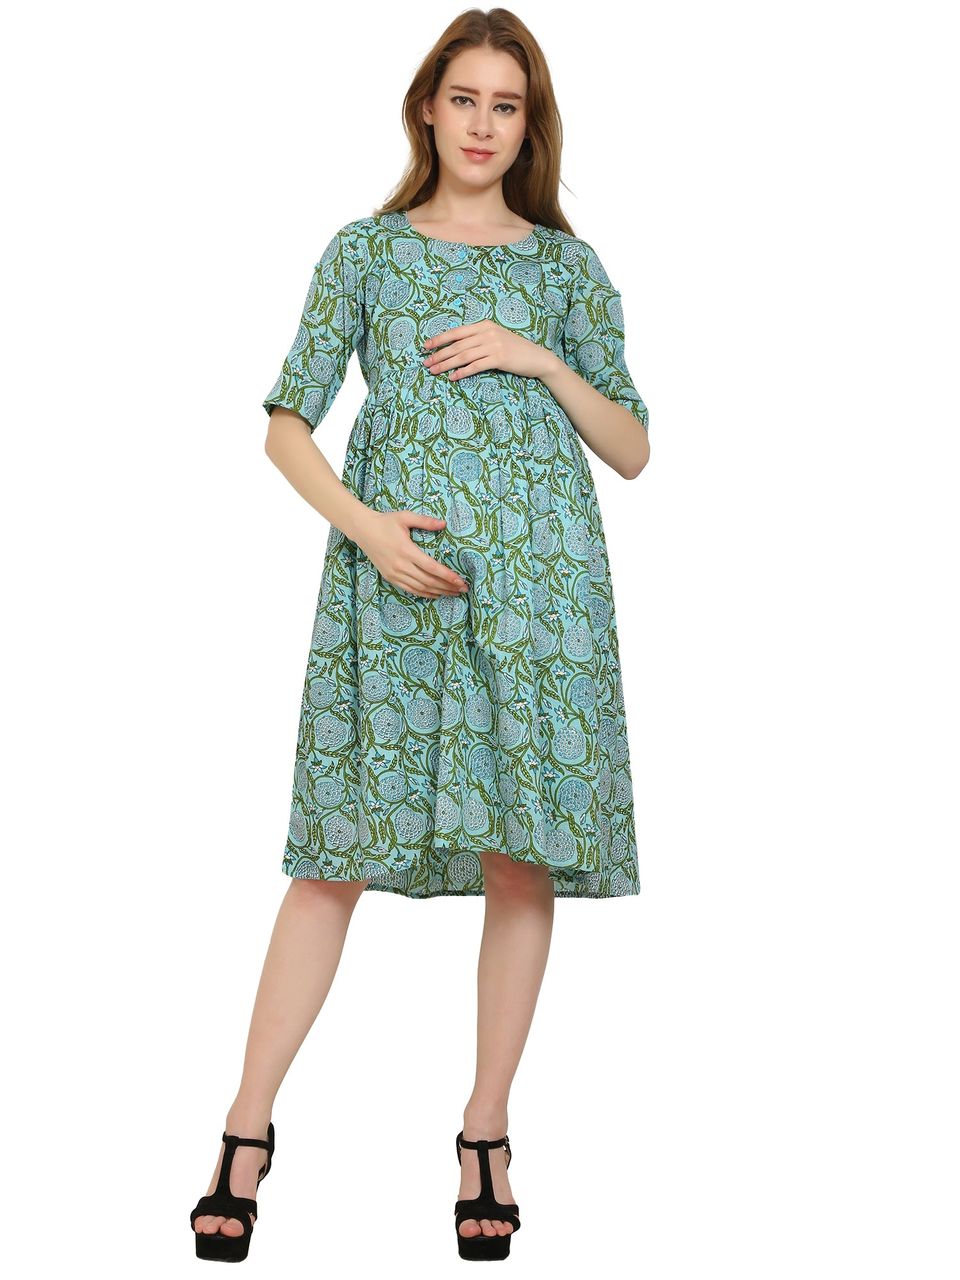 Moms Ever Maternity and Nursing Pre and Post Pregnancy Pure Cotton Printed Dress - Teal